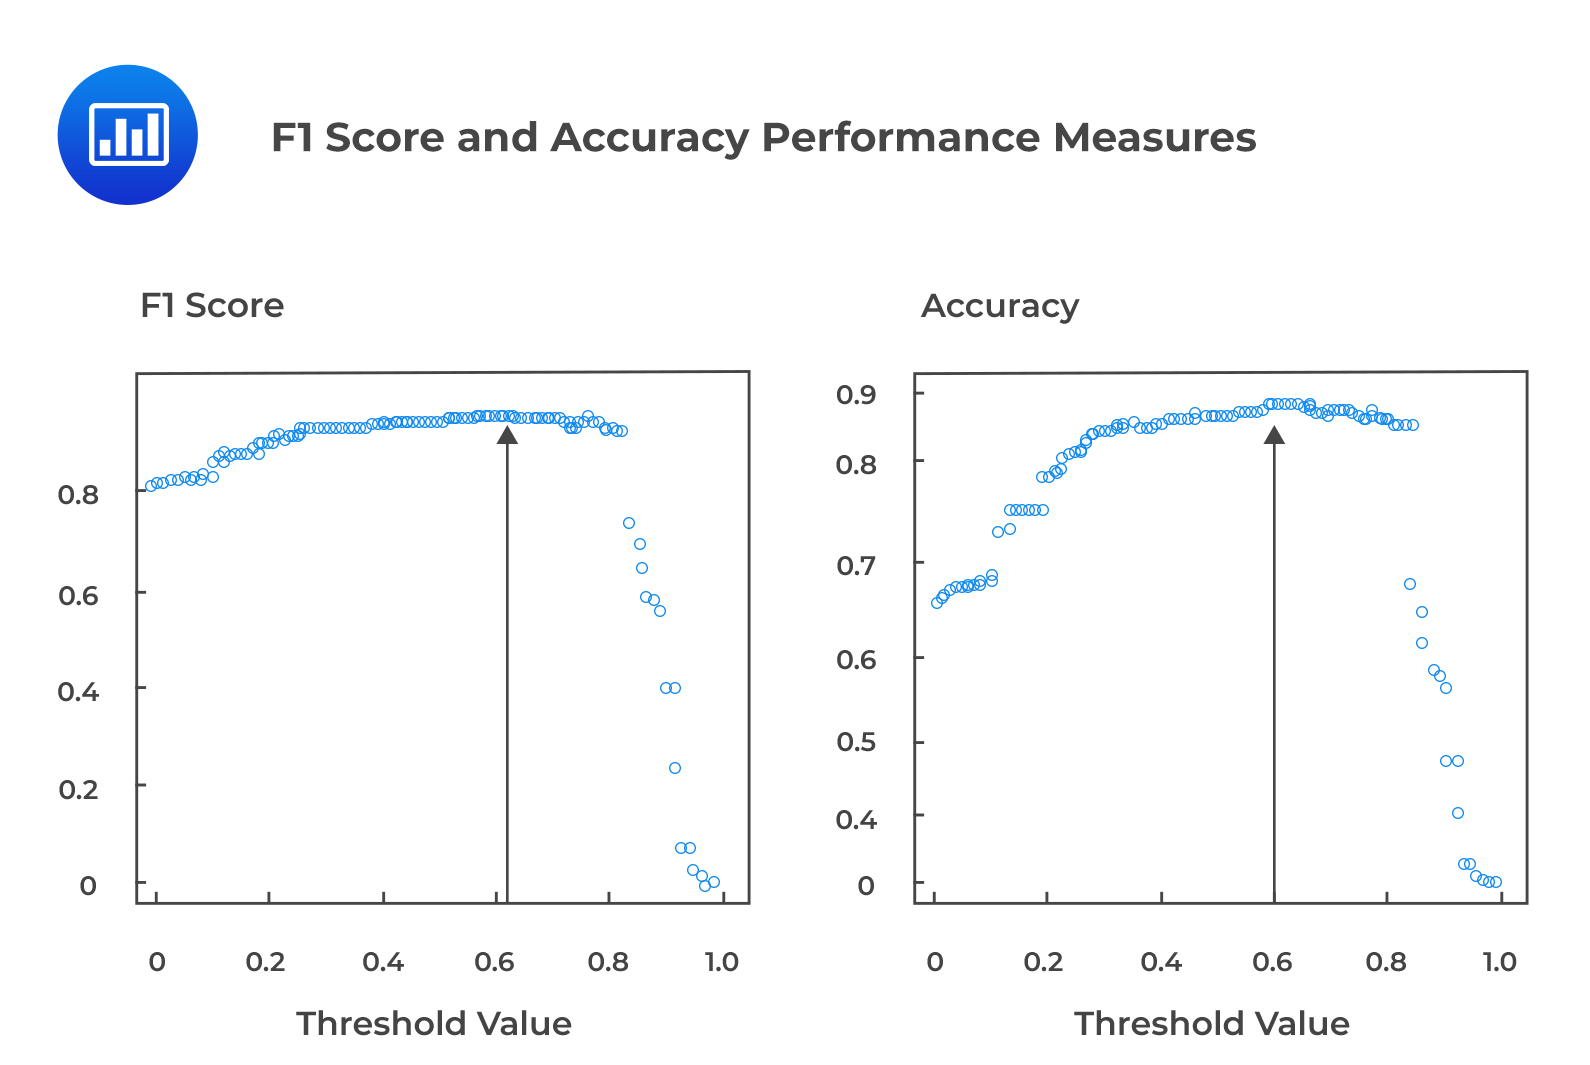 F1 Score and Accuracy Performance Measures CFA, FRM, and Actuarial